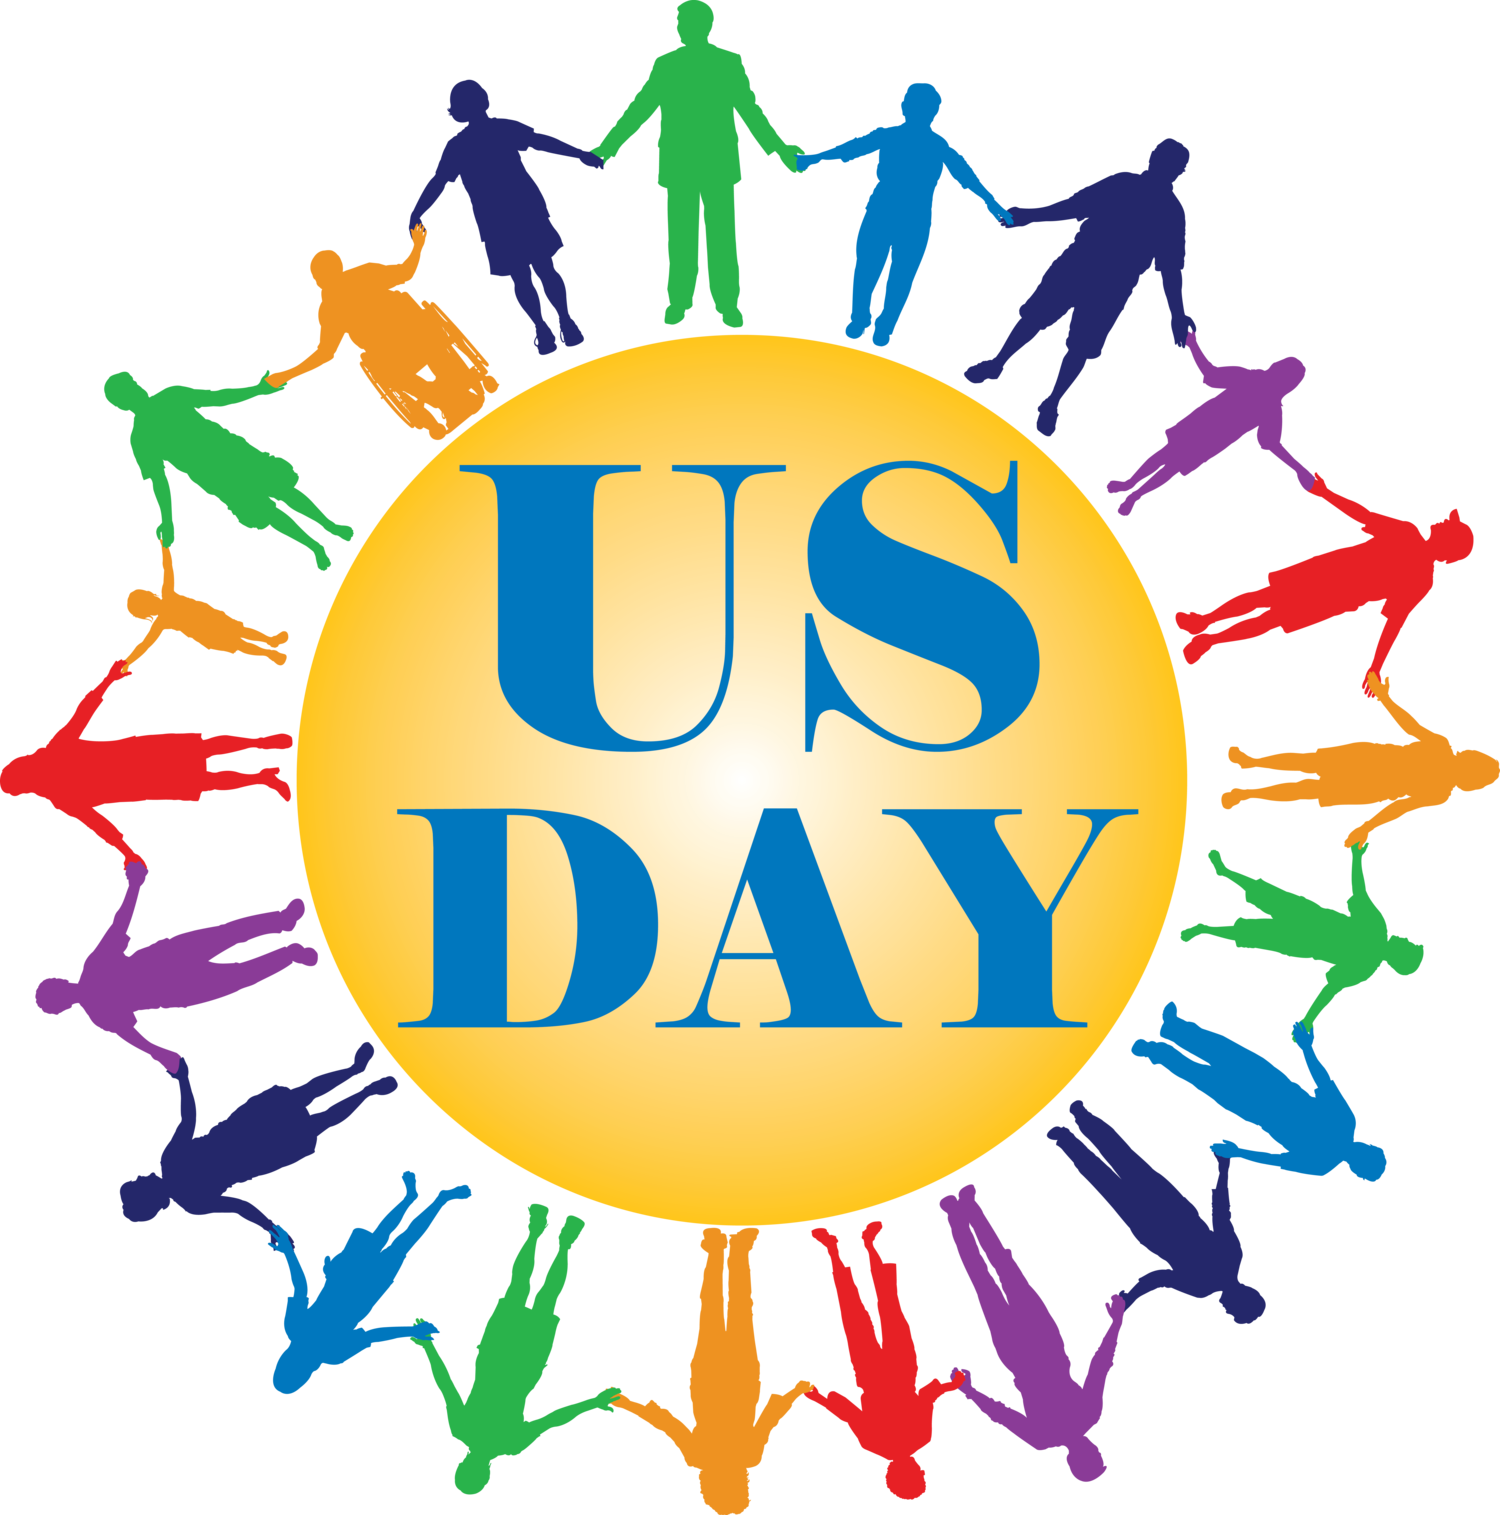 Us Day For Youth - People Holding Hands Silhouette (1500x1515)